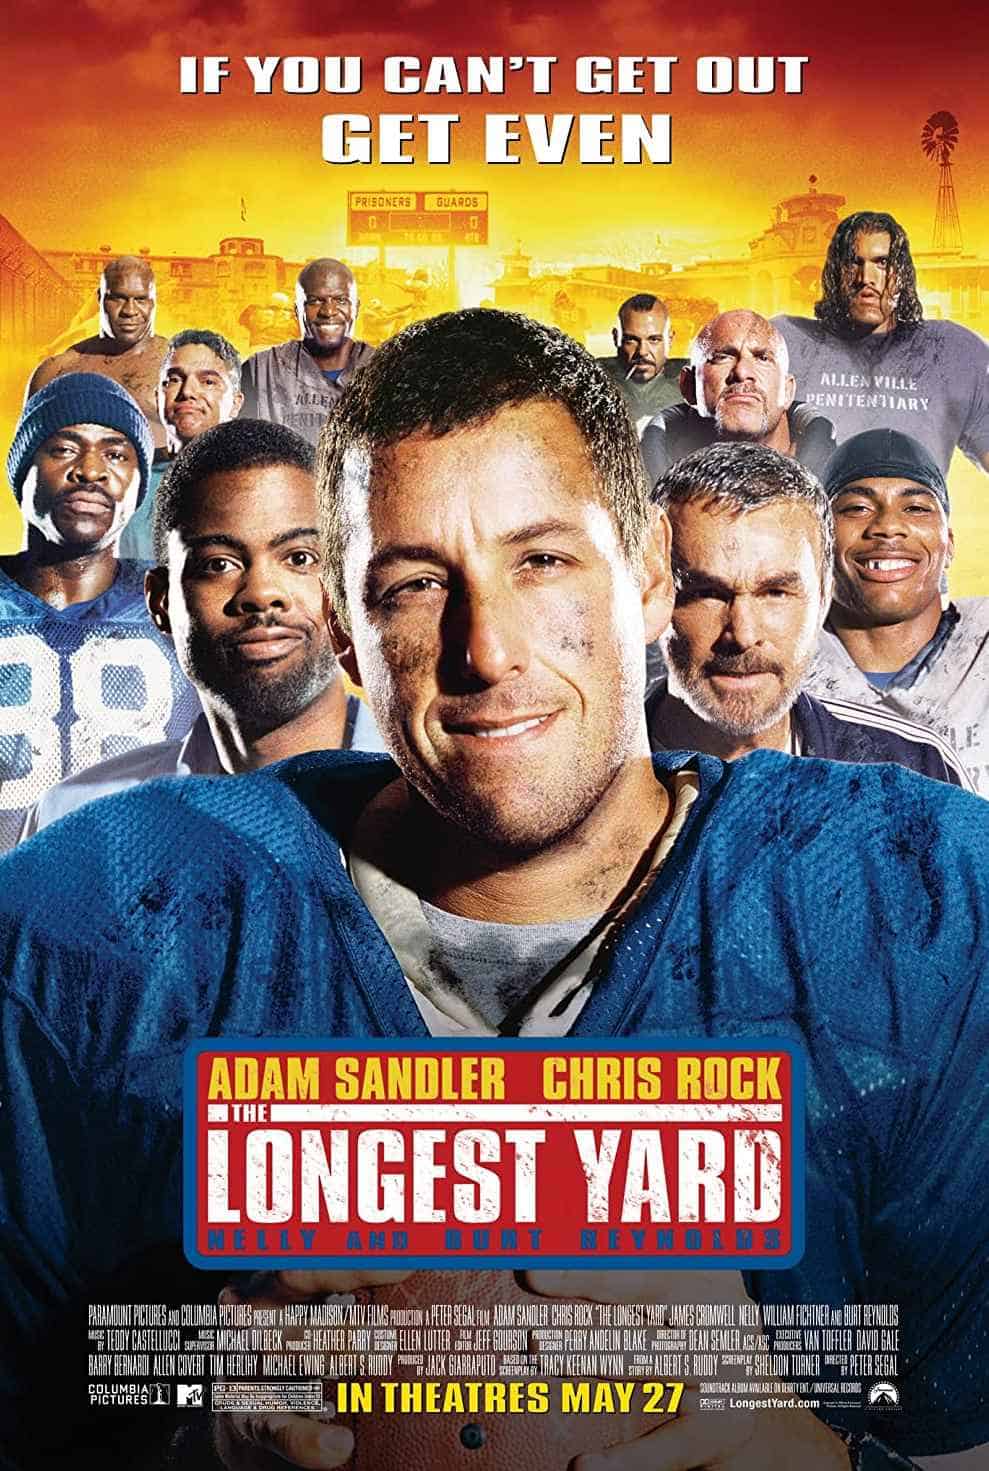 Best Prison Movies You Can't Miss The Longest Yard (2005)